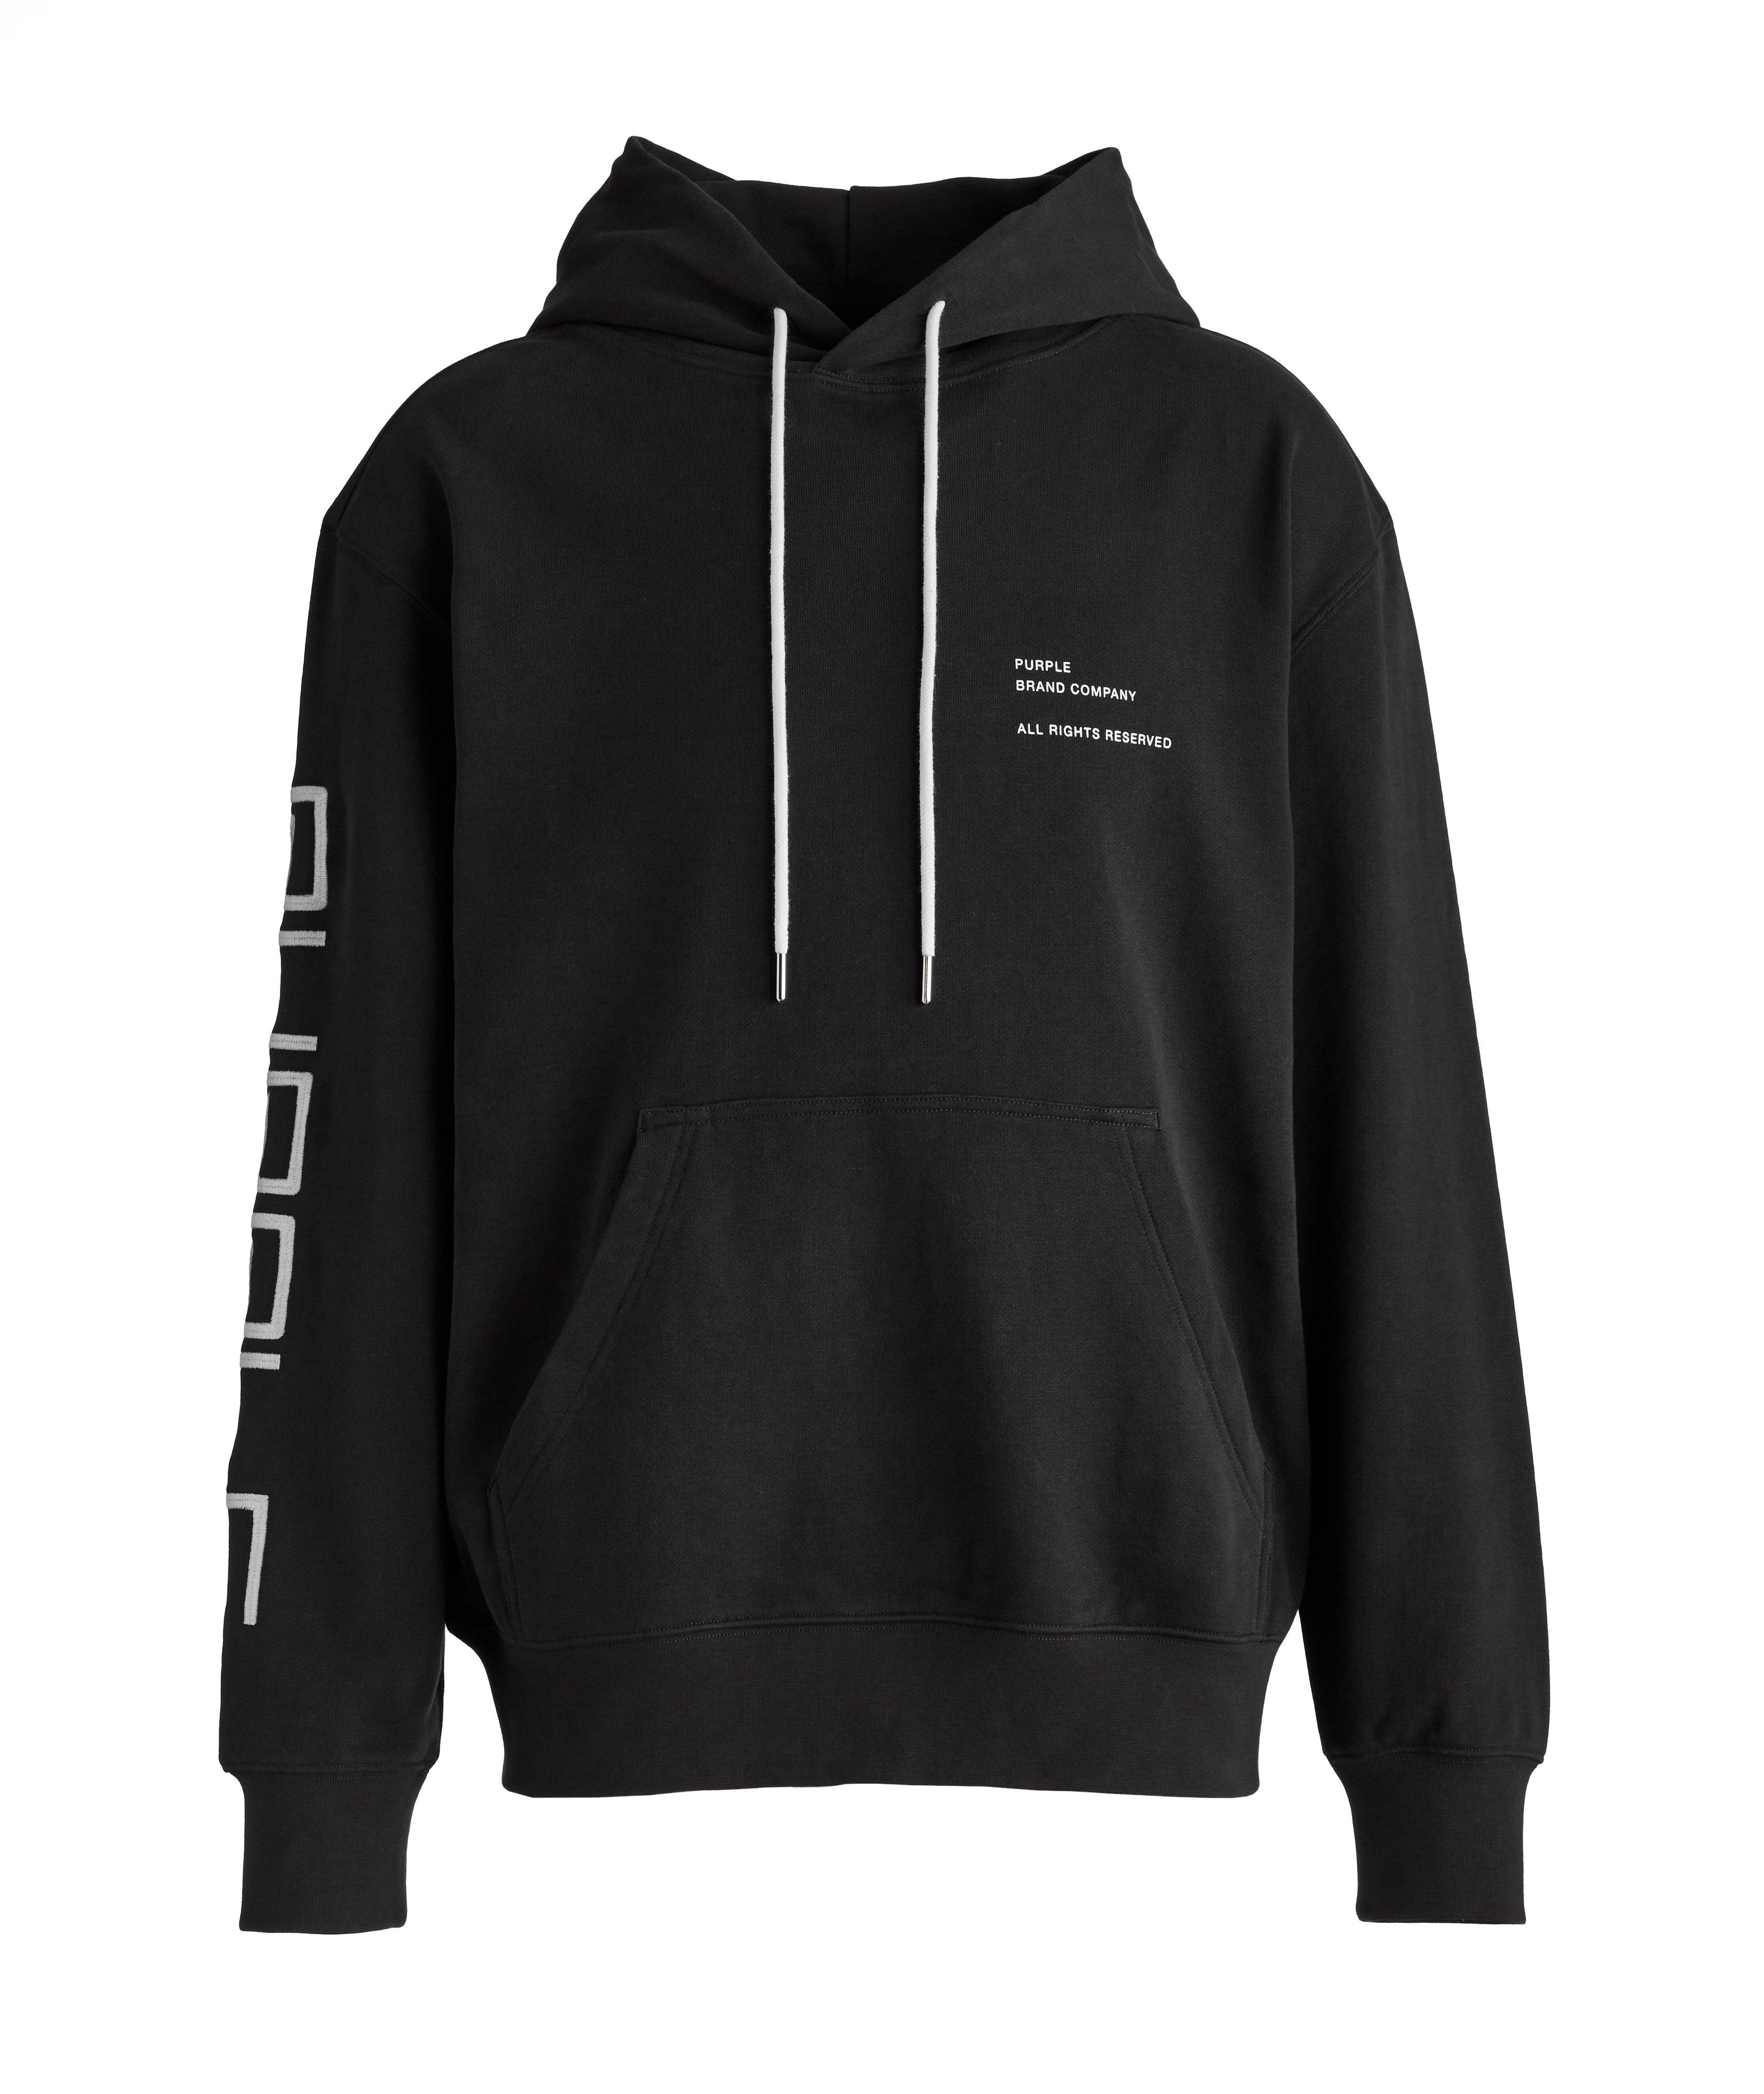 P410 Terry Embroidered Company Hoodie image 0